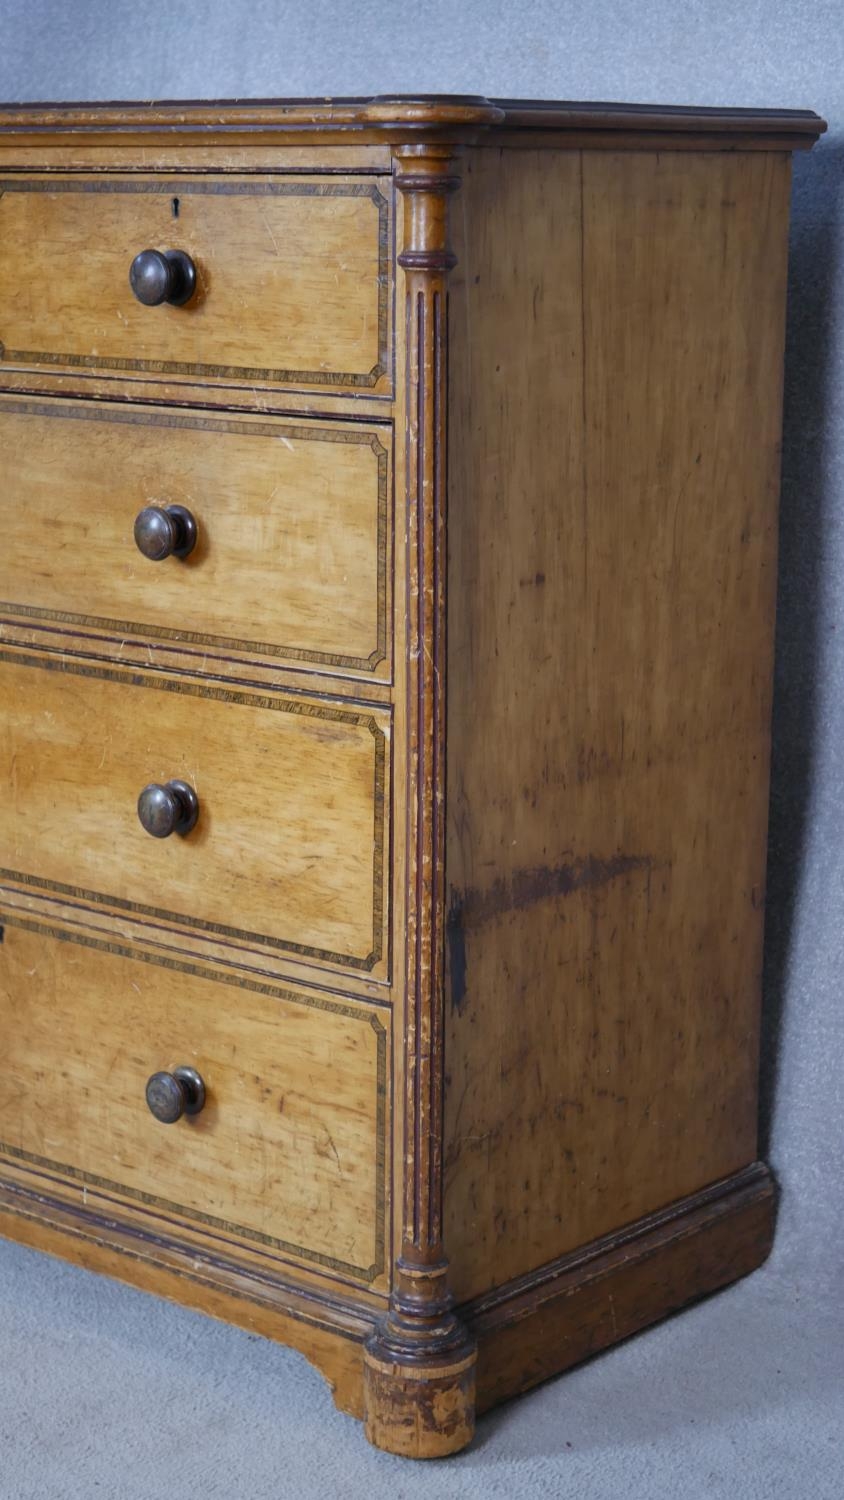 A late Victorian Aesthetic movement pitch pine chest of drawers with painted and ebonised decoration - Image 3 of 8